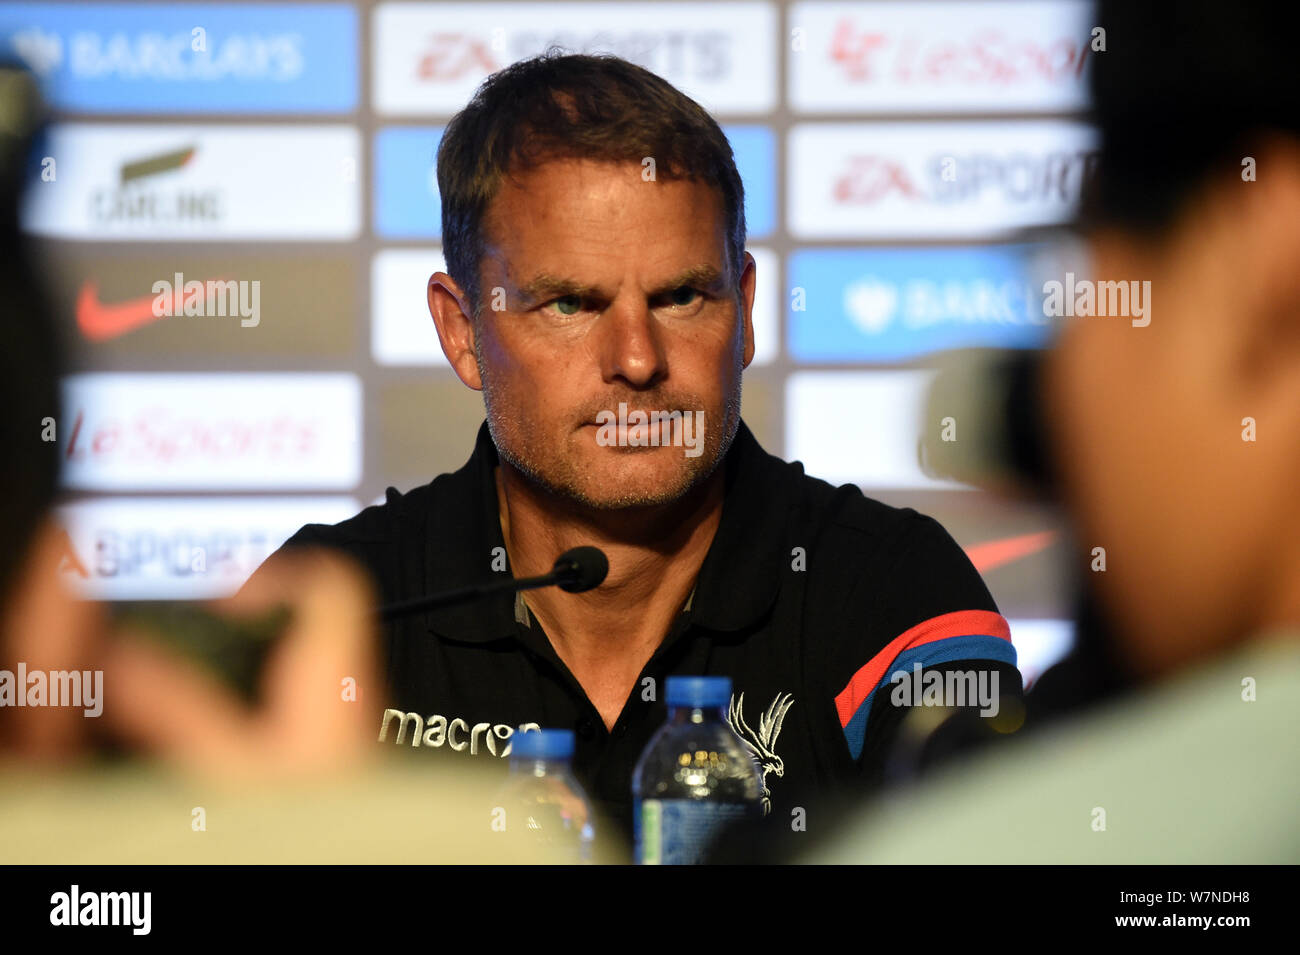 Head coach Frank de Boer of Crystal Palace F.C. attends a press conference for the 2017 Premier League Asia Trophy against Liverpool F.C. in Hong Kong Stock Photo